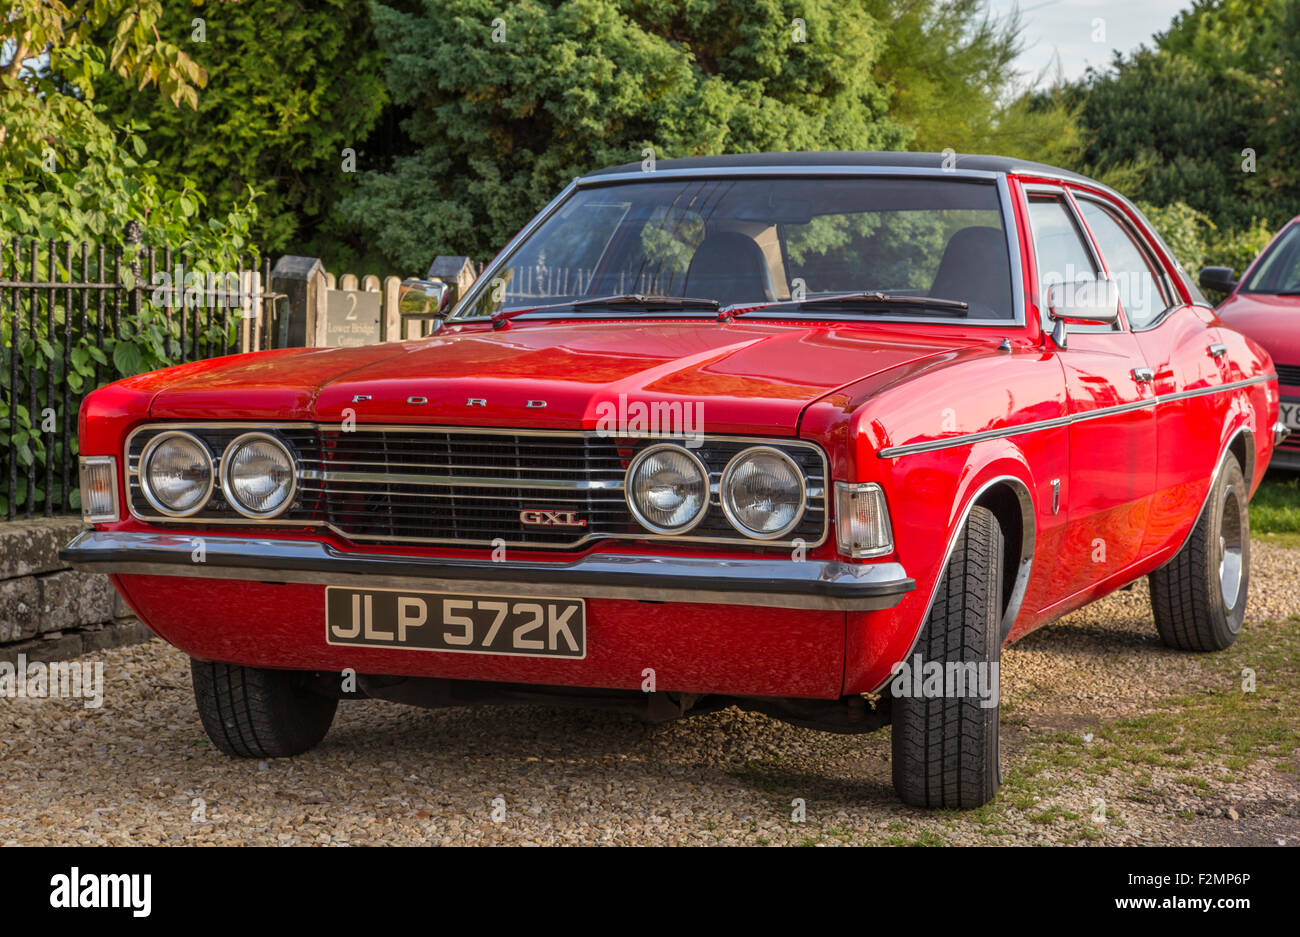 A red 1972 Ford Cortina Mk3 GXL four door Stock Photo: 87737630 - Alamy